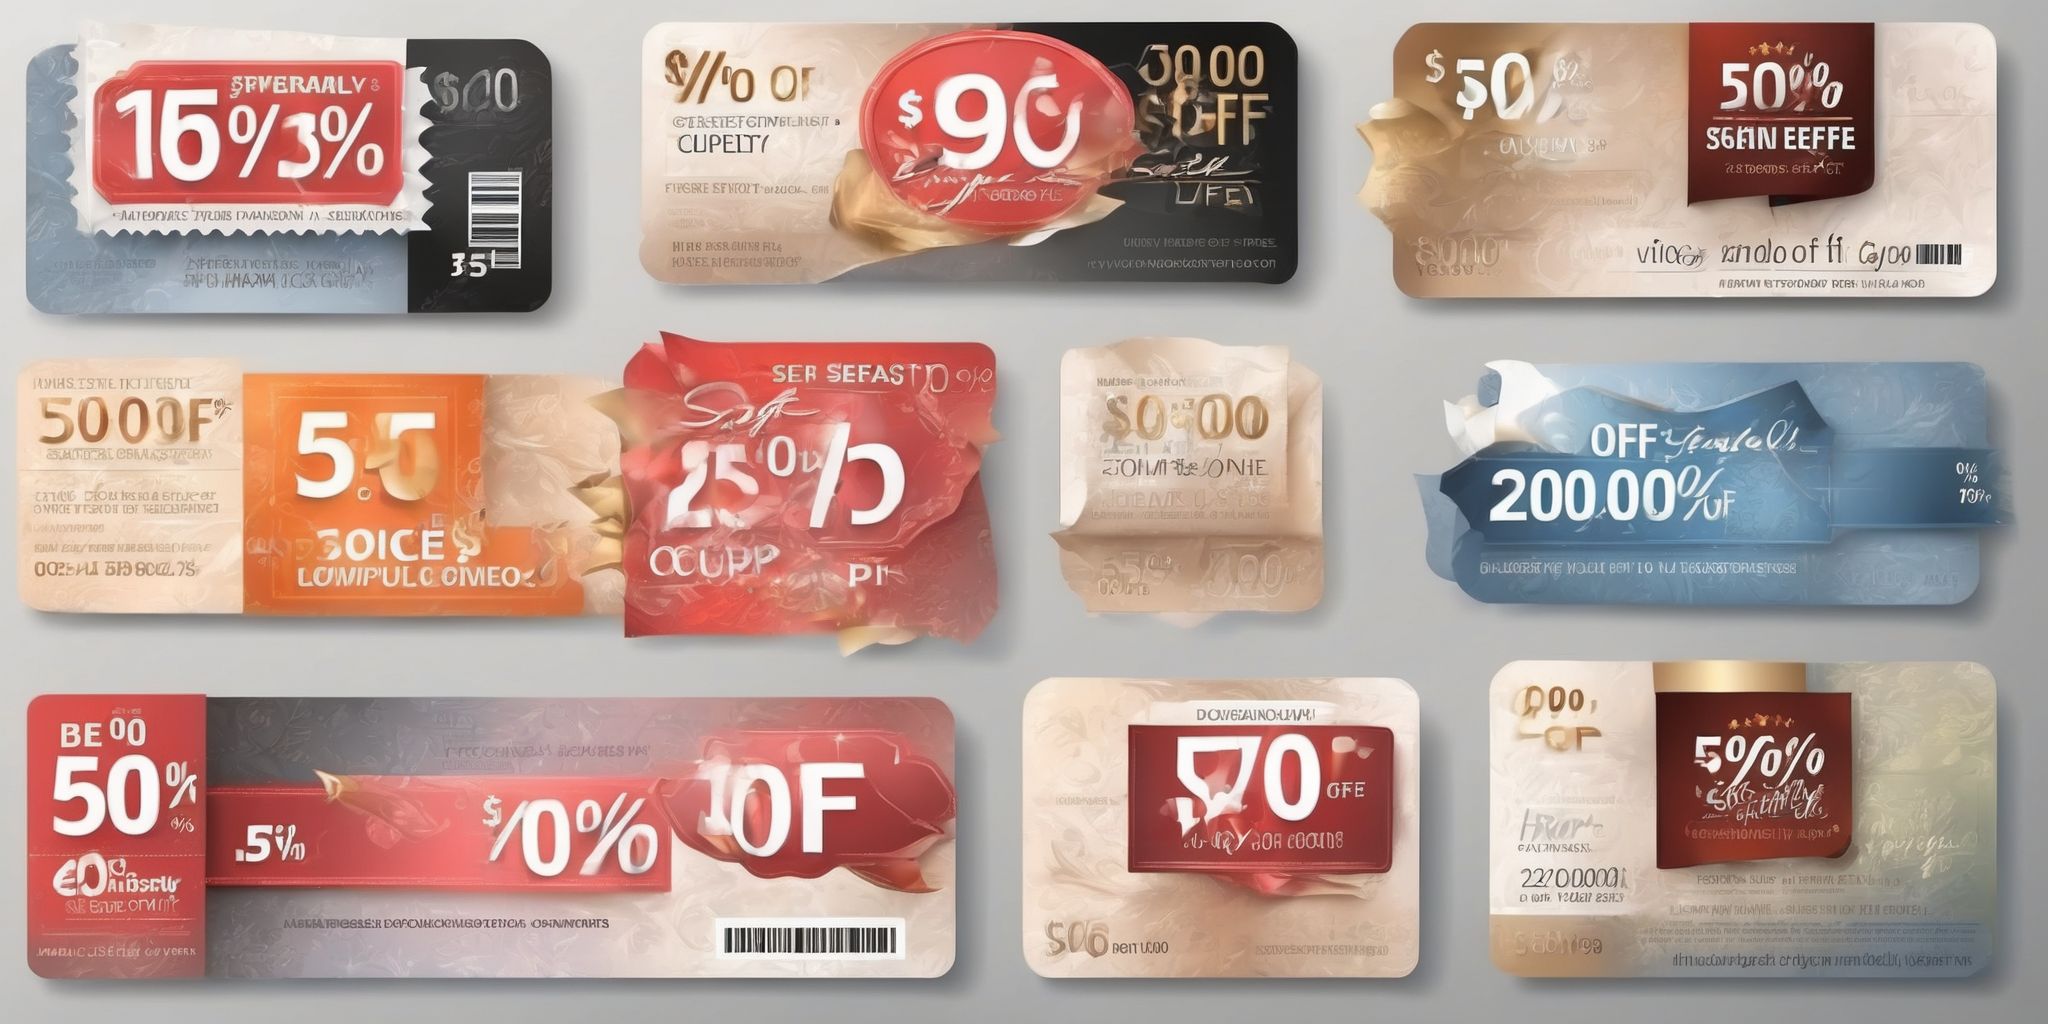 Discount coupons  in realistic, photographic style